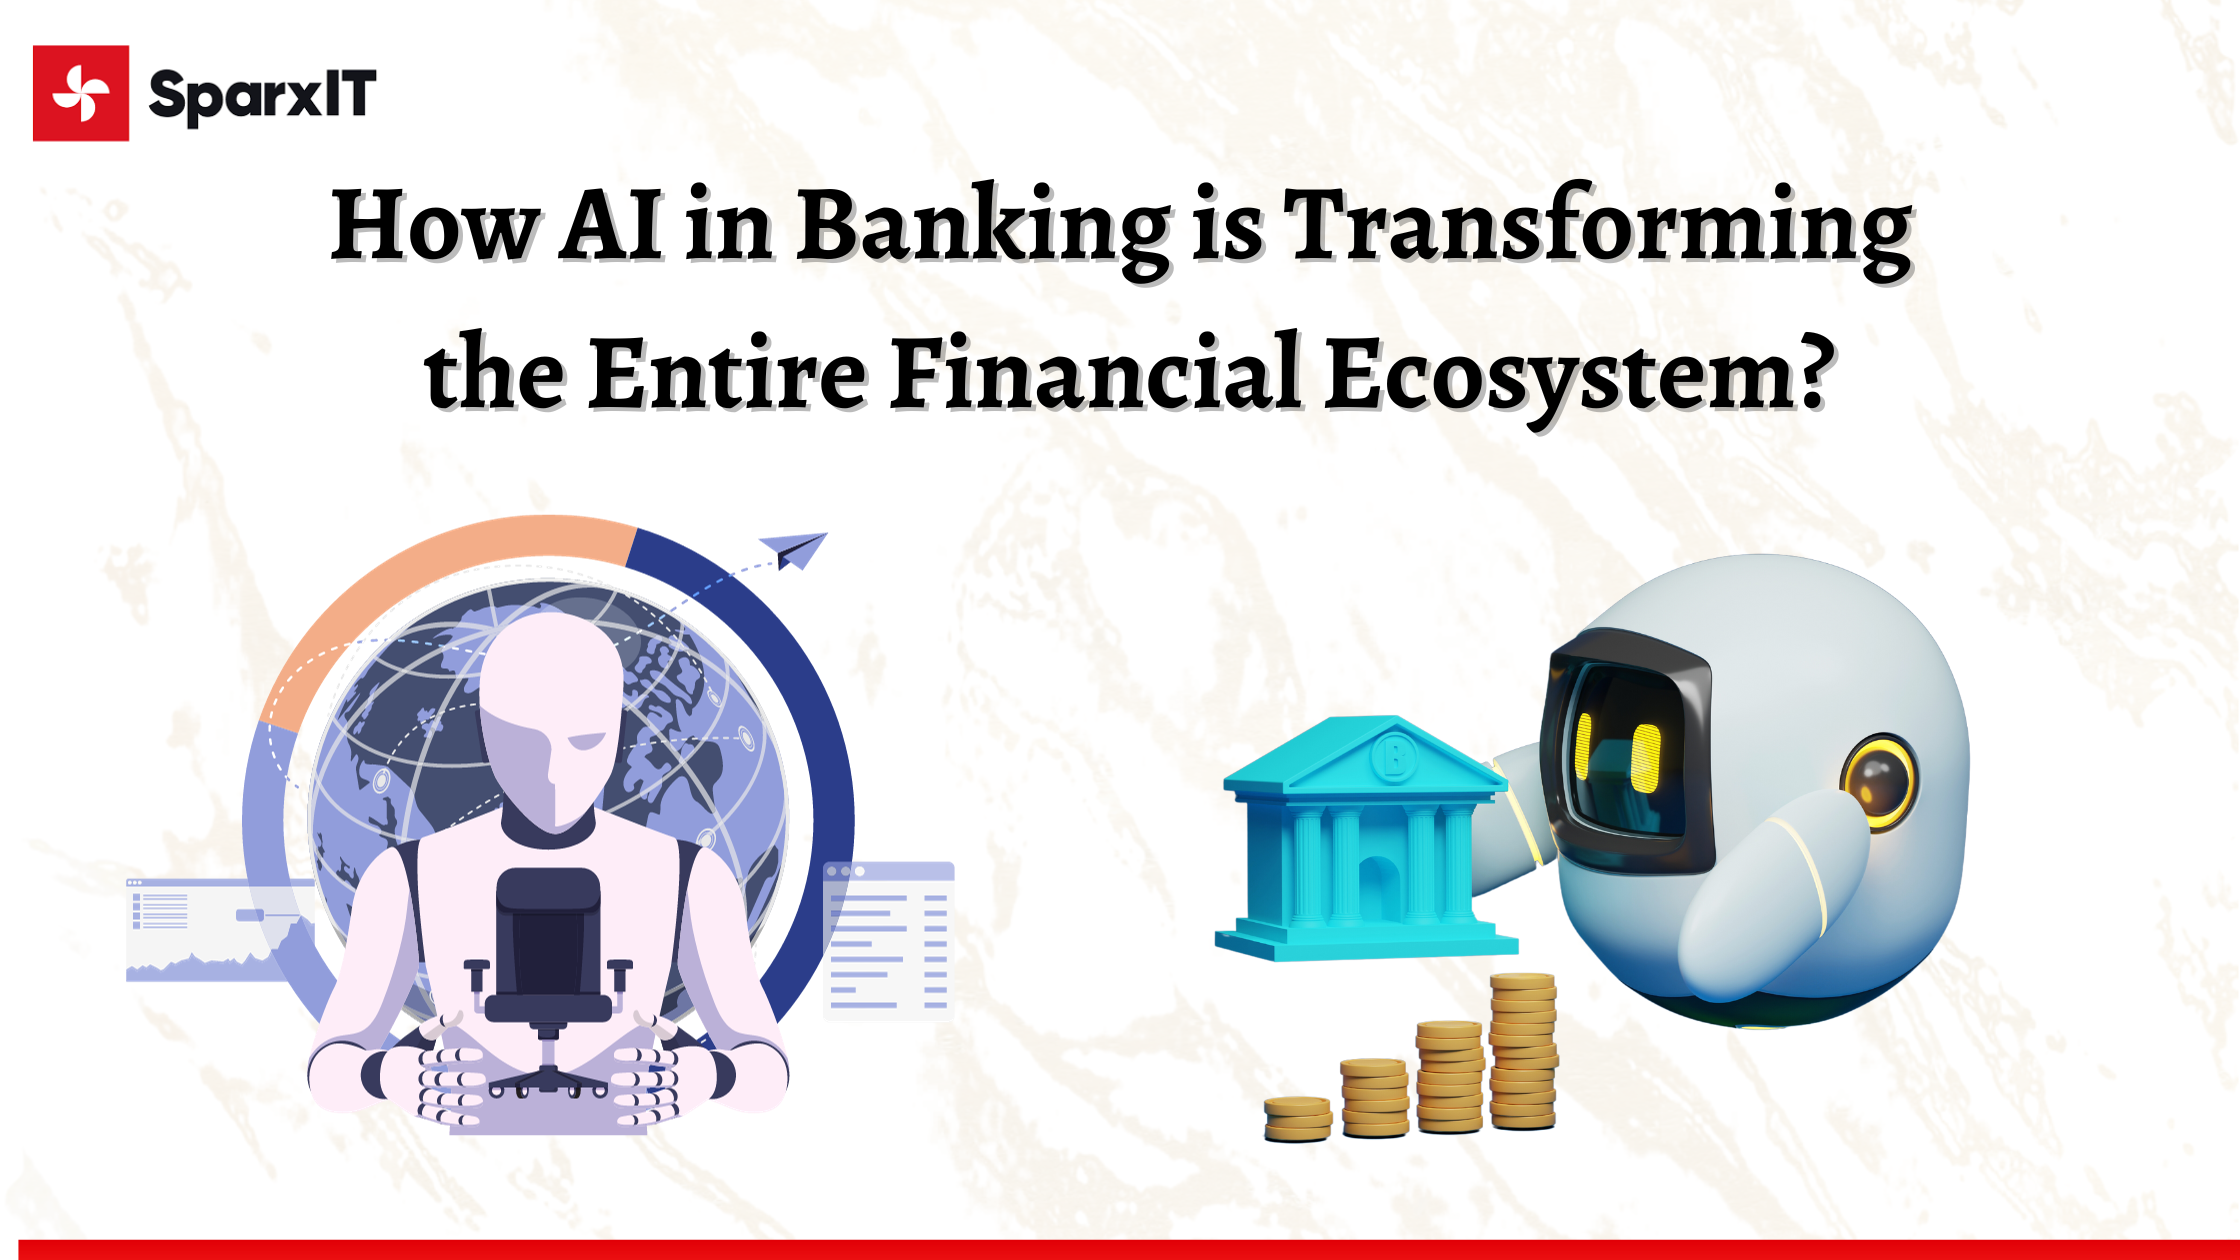 How AI in Banking is Transforming the Entire Financial Ecosystem?